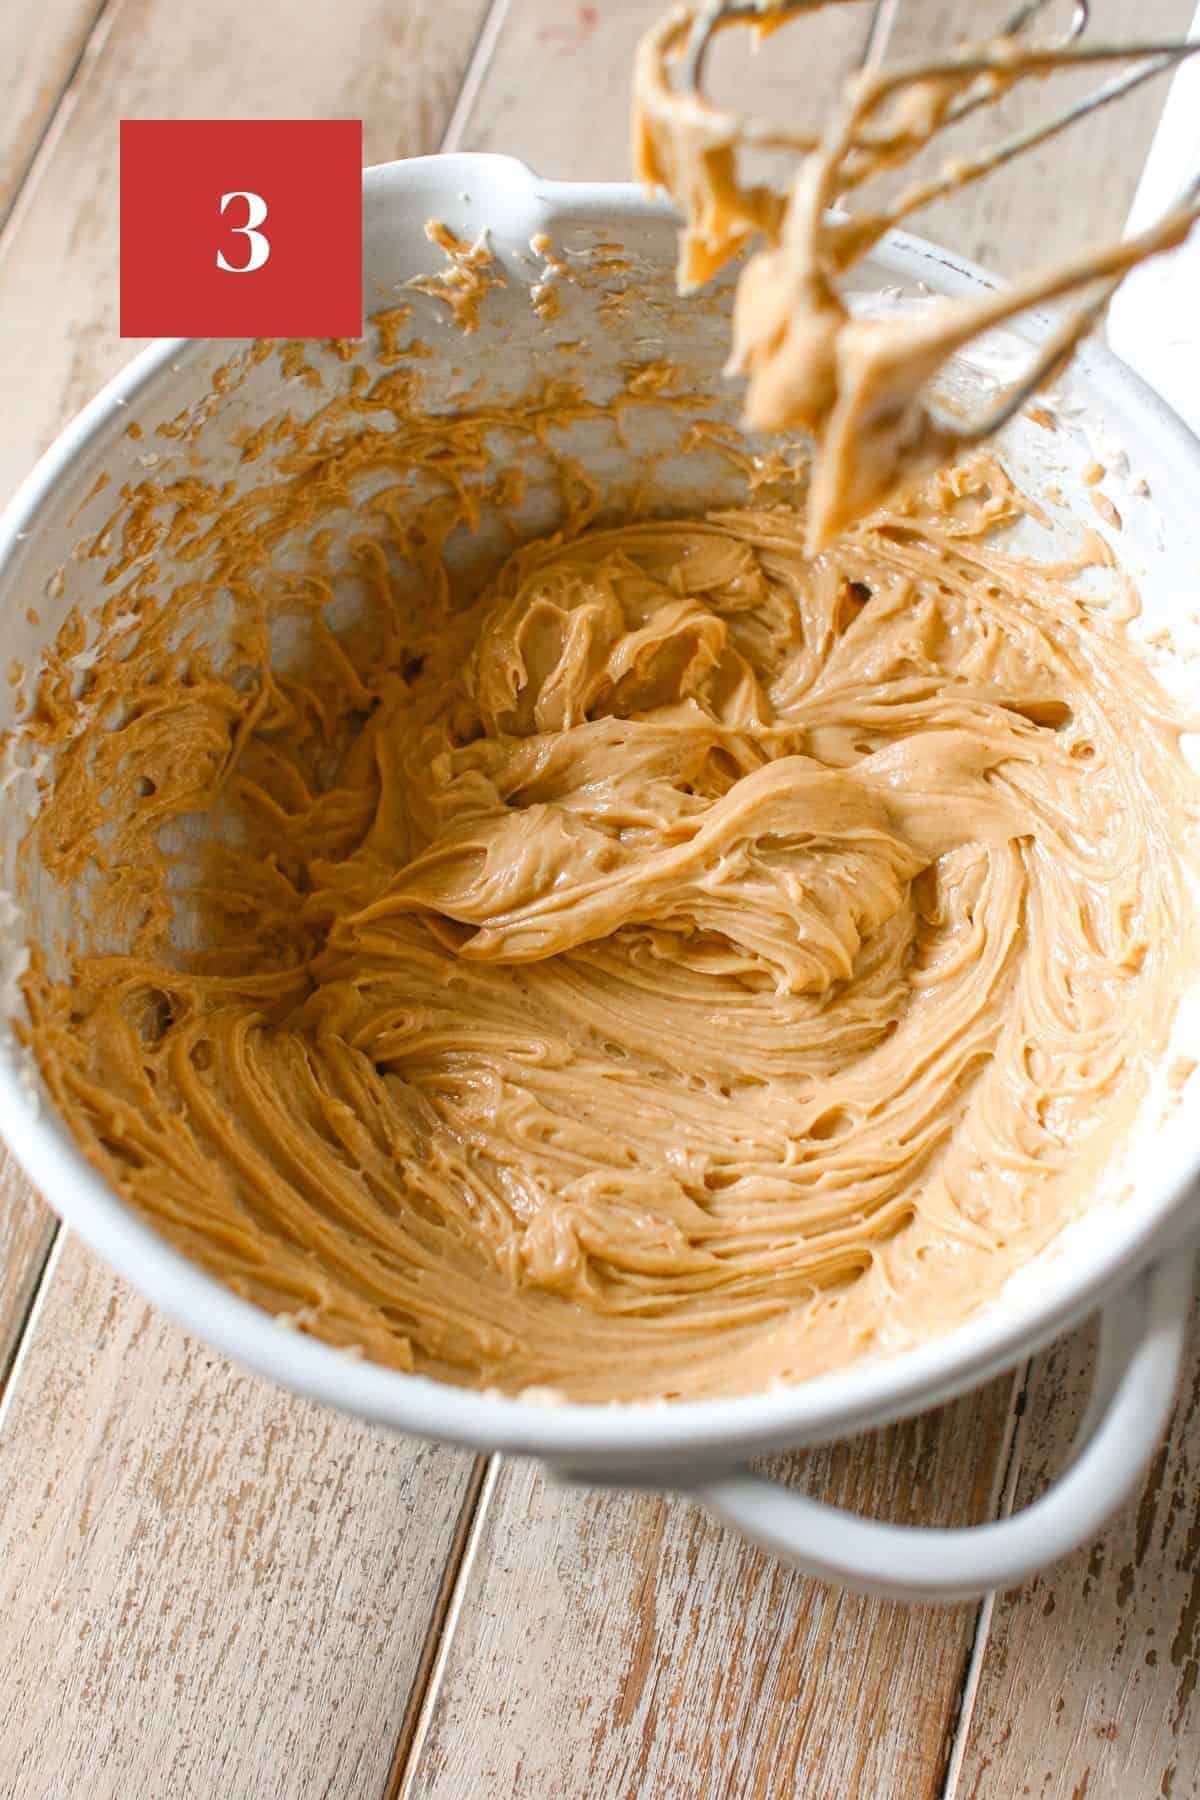 Creamy peanut butter whipped in a mixing bowl with a hand mixer off to the side on a wood plank background. In the upper left corner is a dark red square with a white '3' in the center.